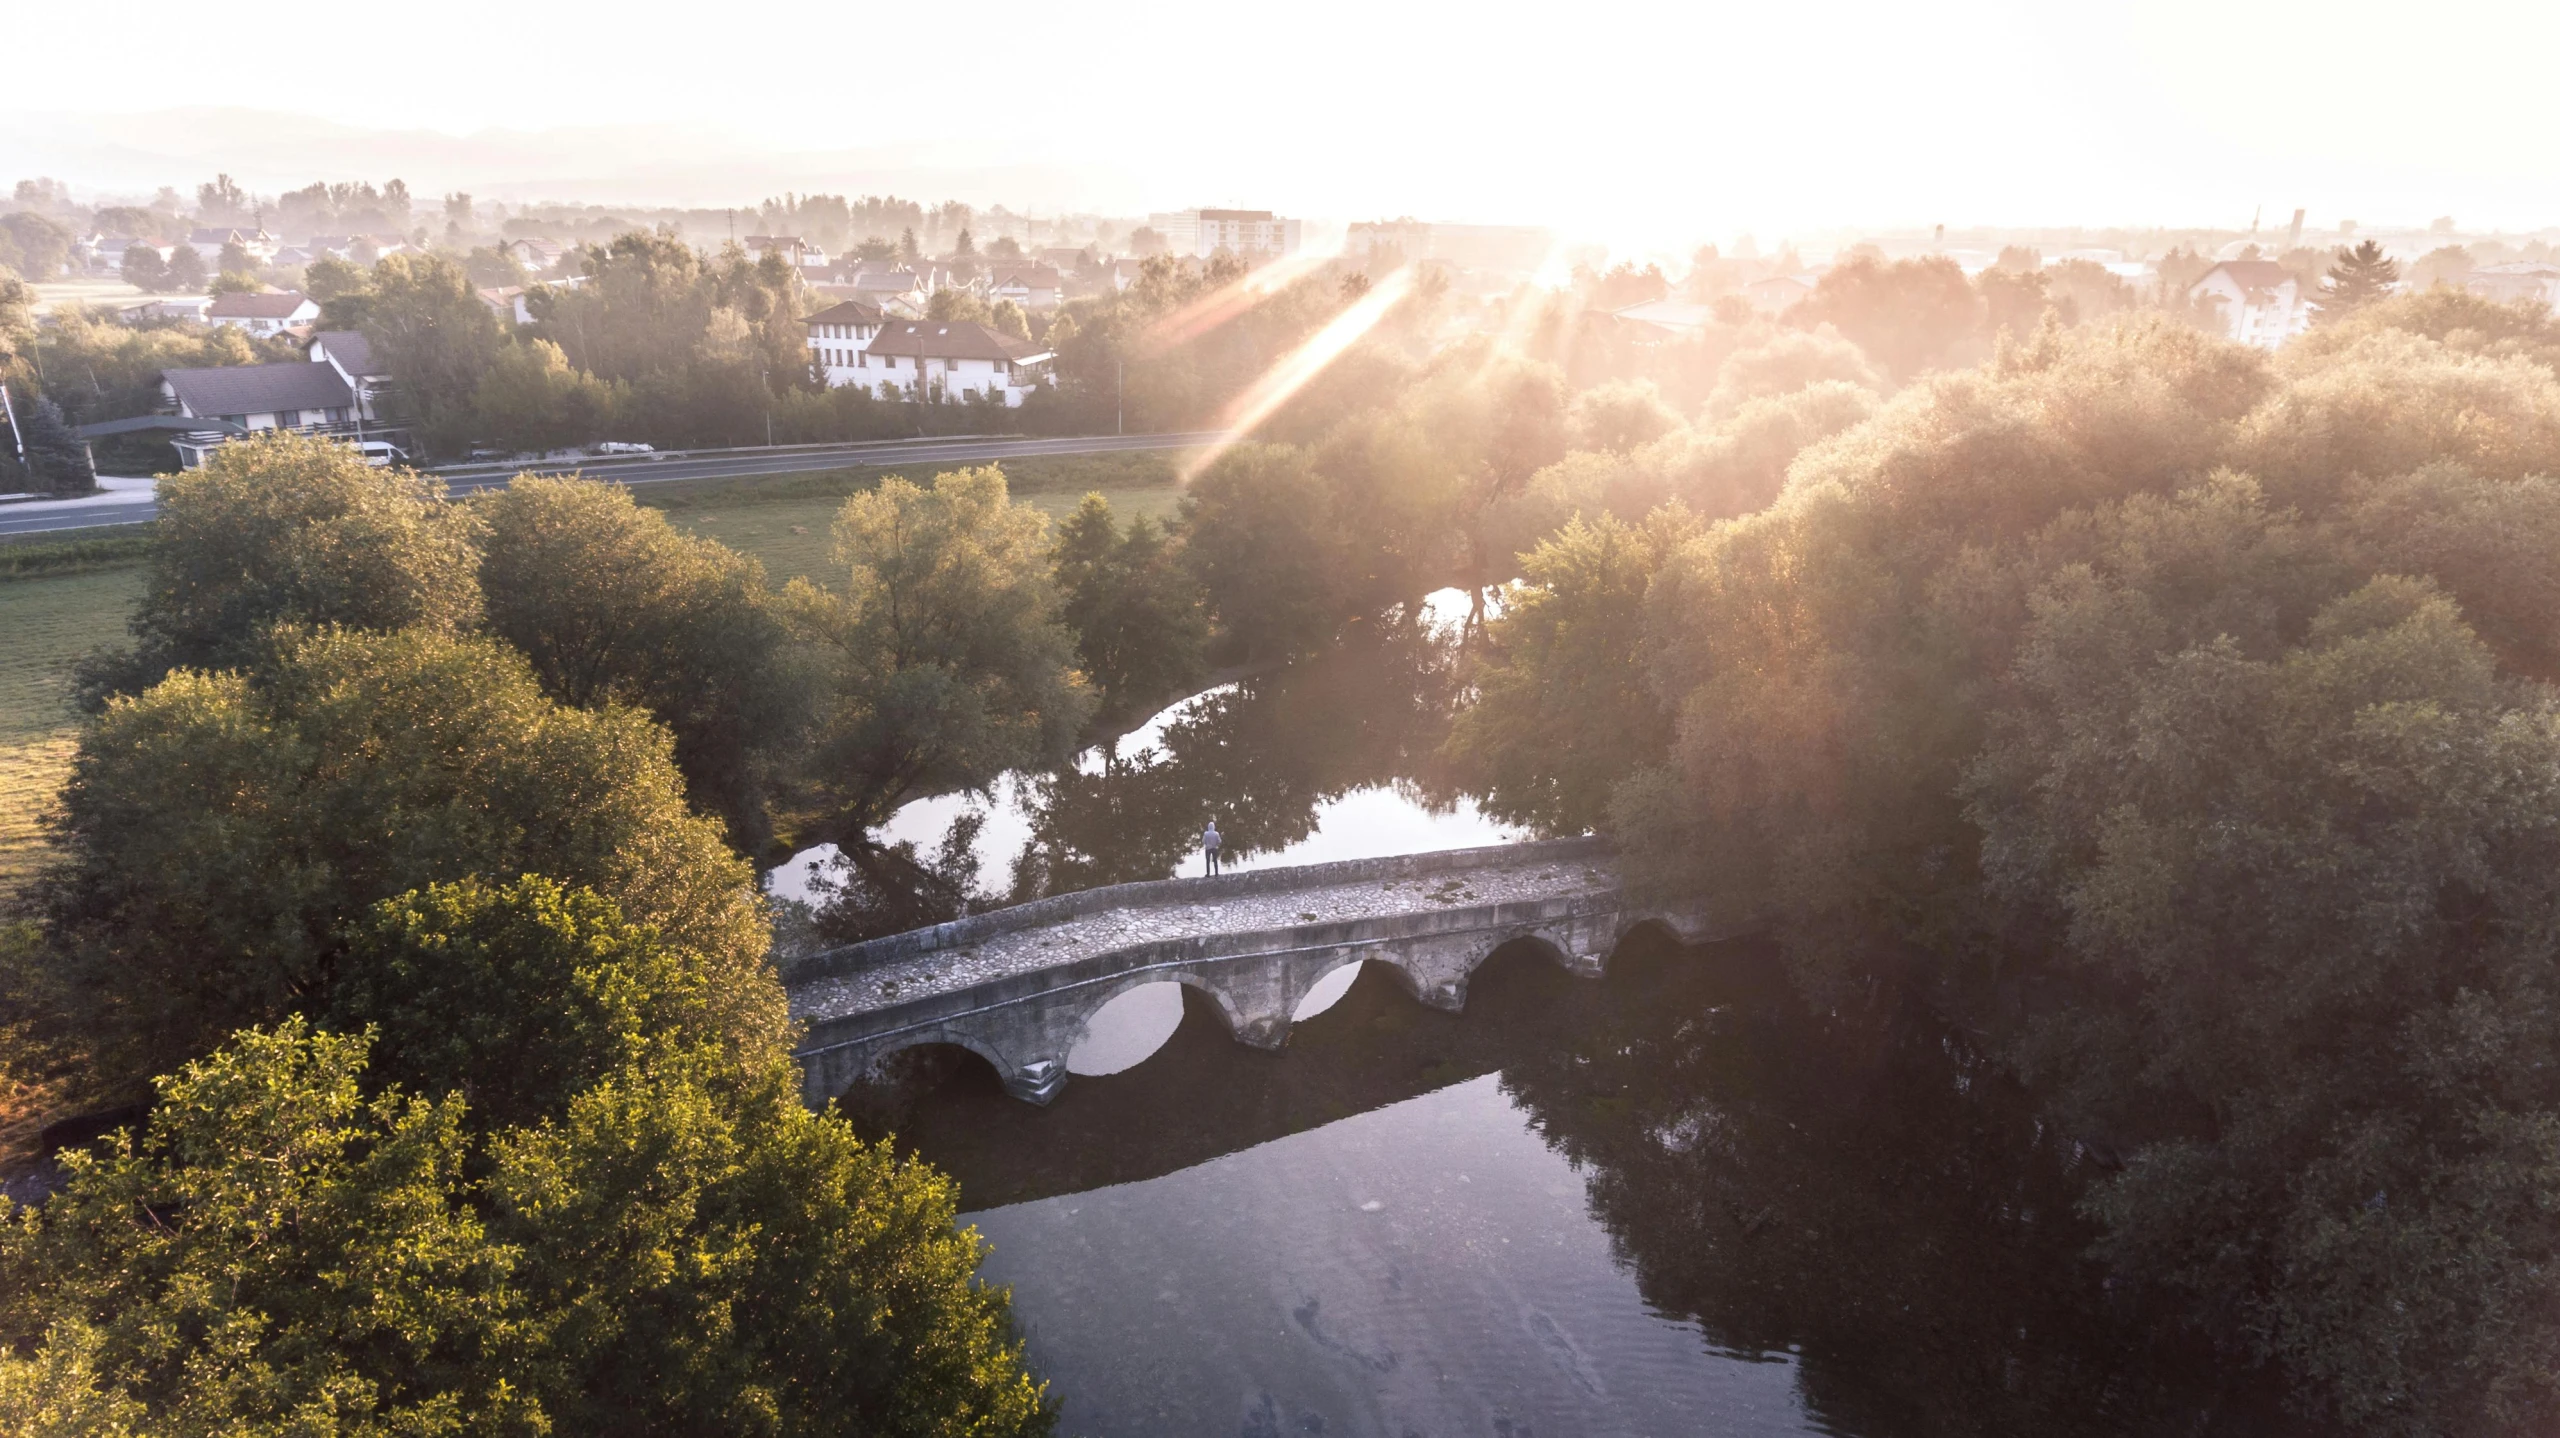 a bridge over a body of water surrounded by trees, a picture, by Tom Bonson, sun lighting from above, normandy, sunrise lighting, pr shoot